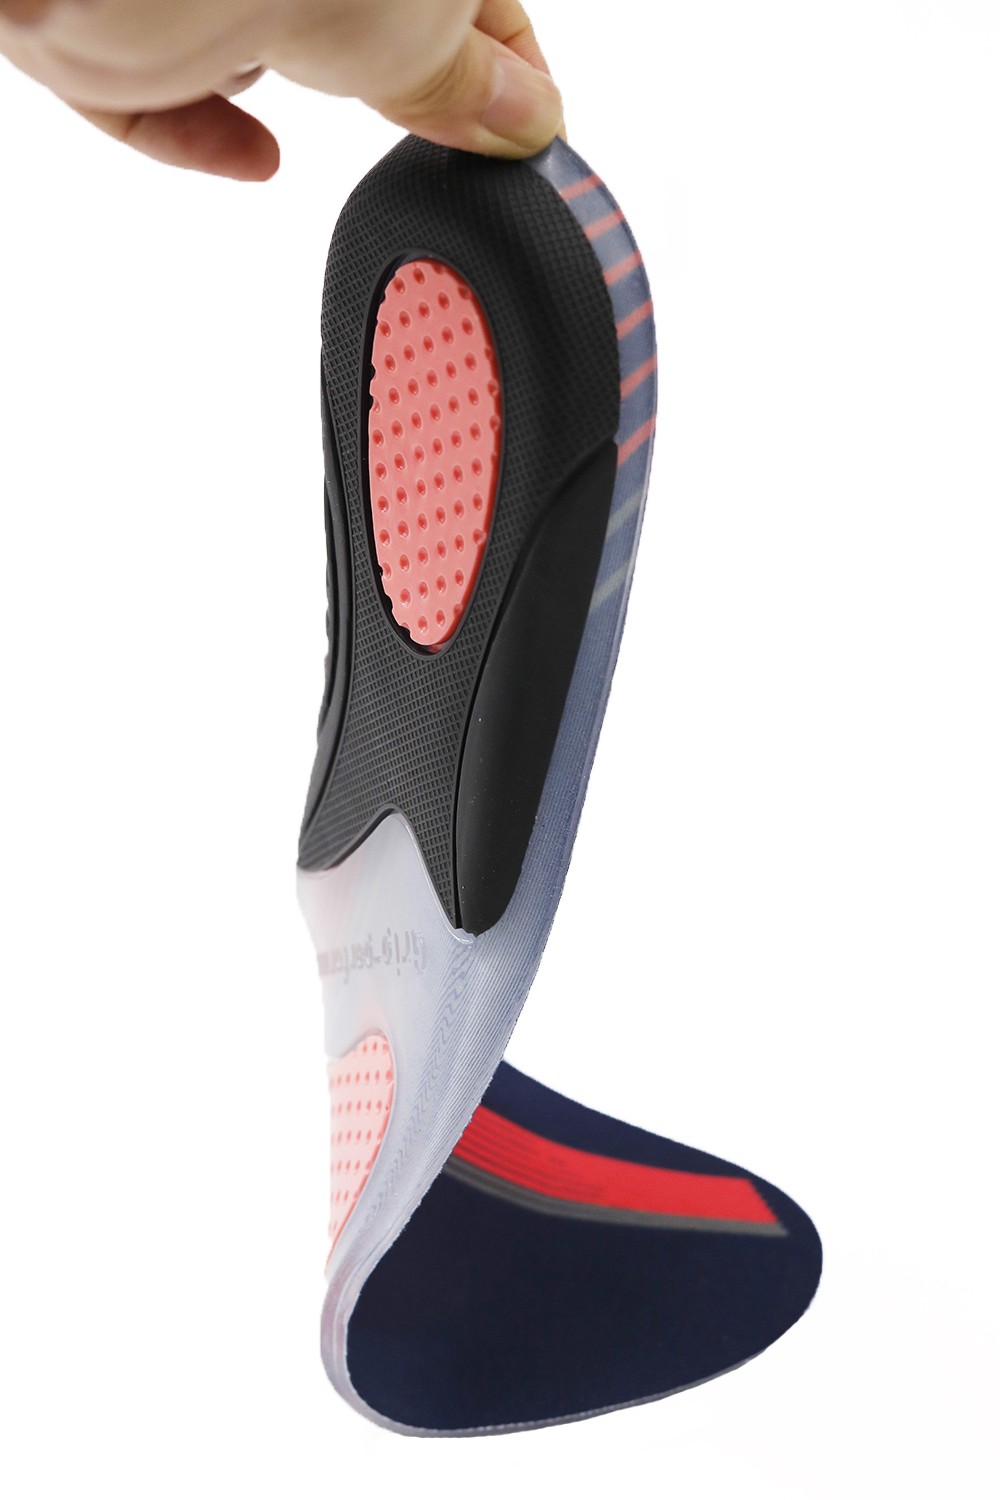 S-King-Bulk Gel Foot Insoles Manufacturer, Gel Insoles For Sneakers | S-king-4